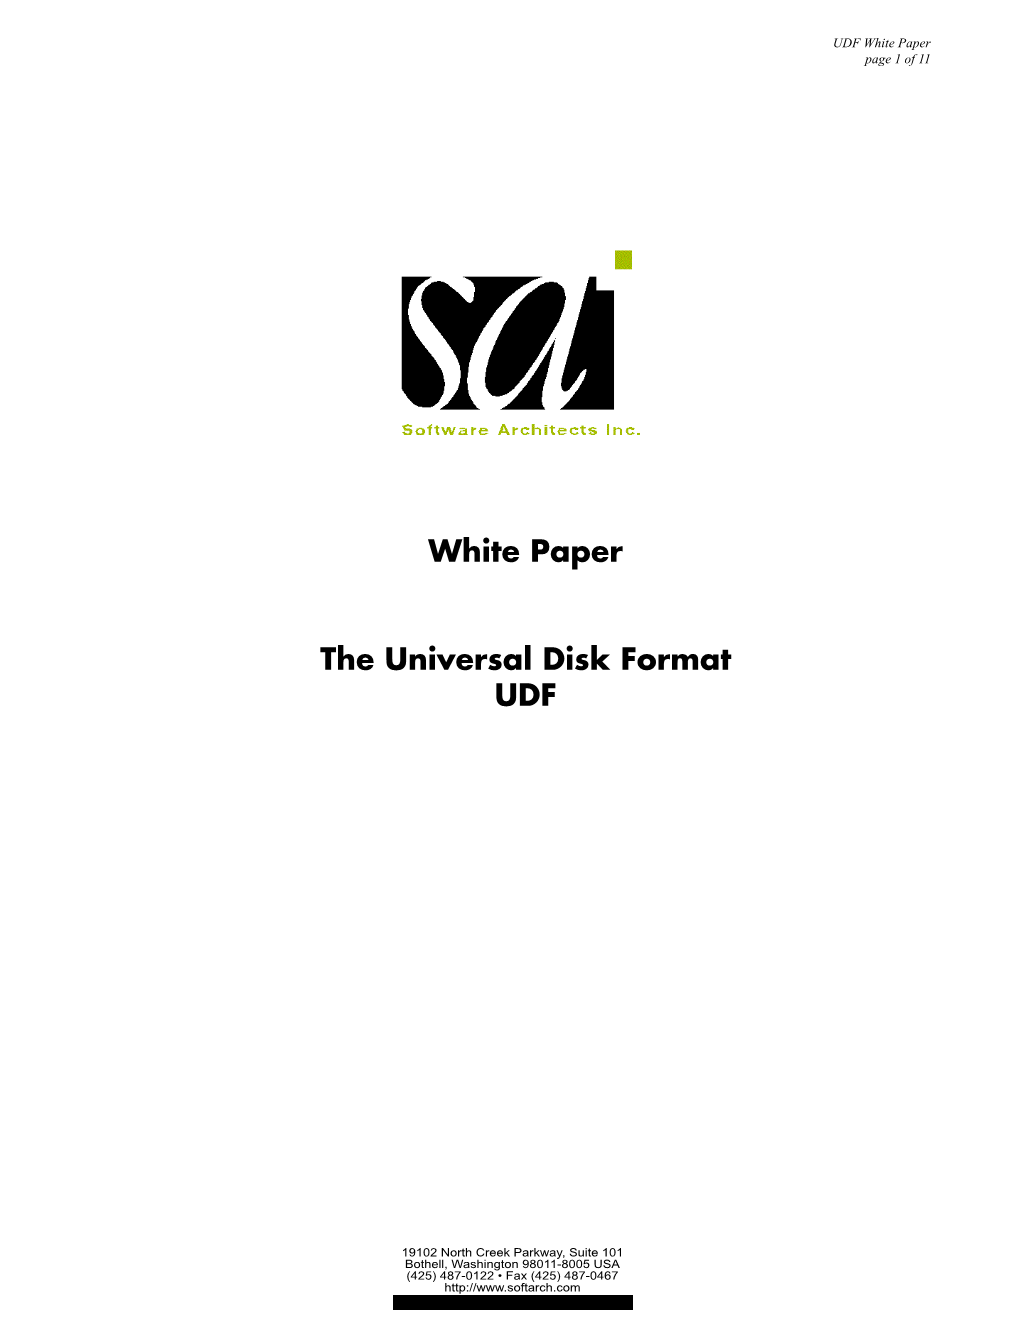 White Paper the Universal Disk Format